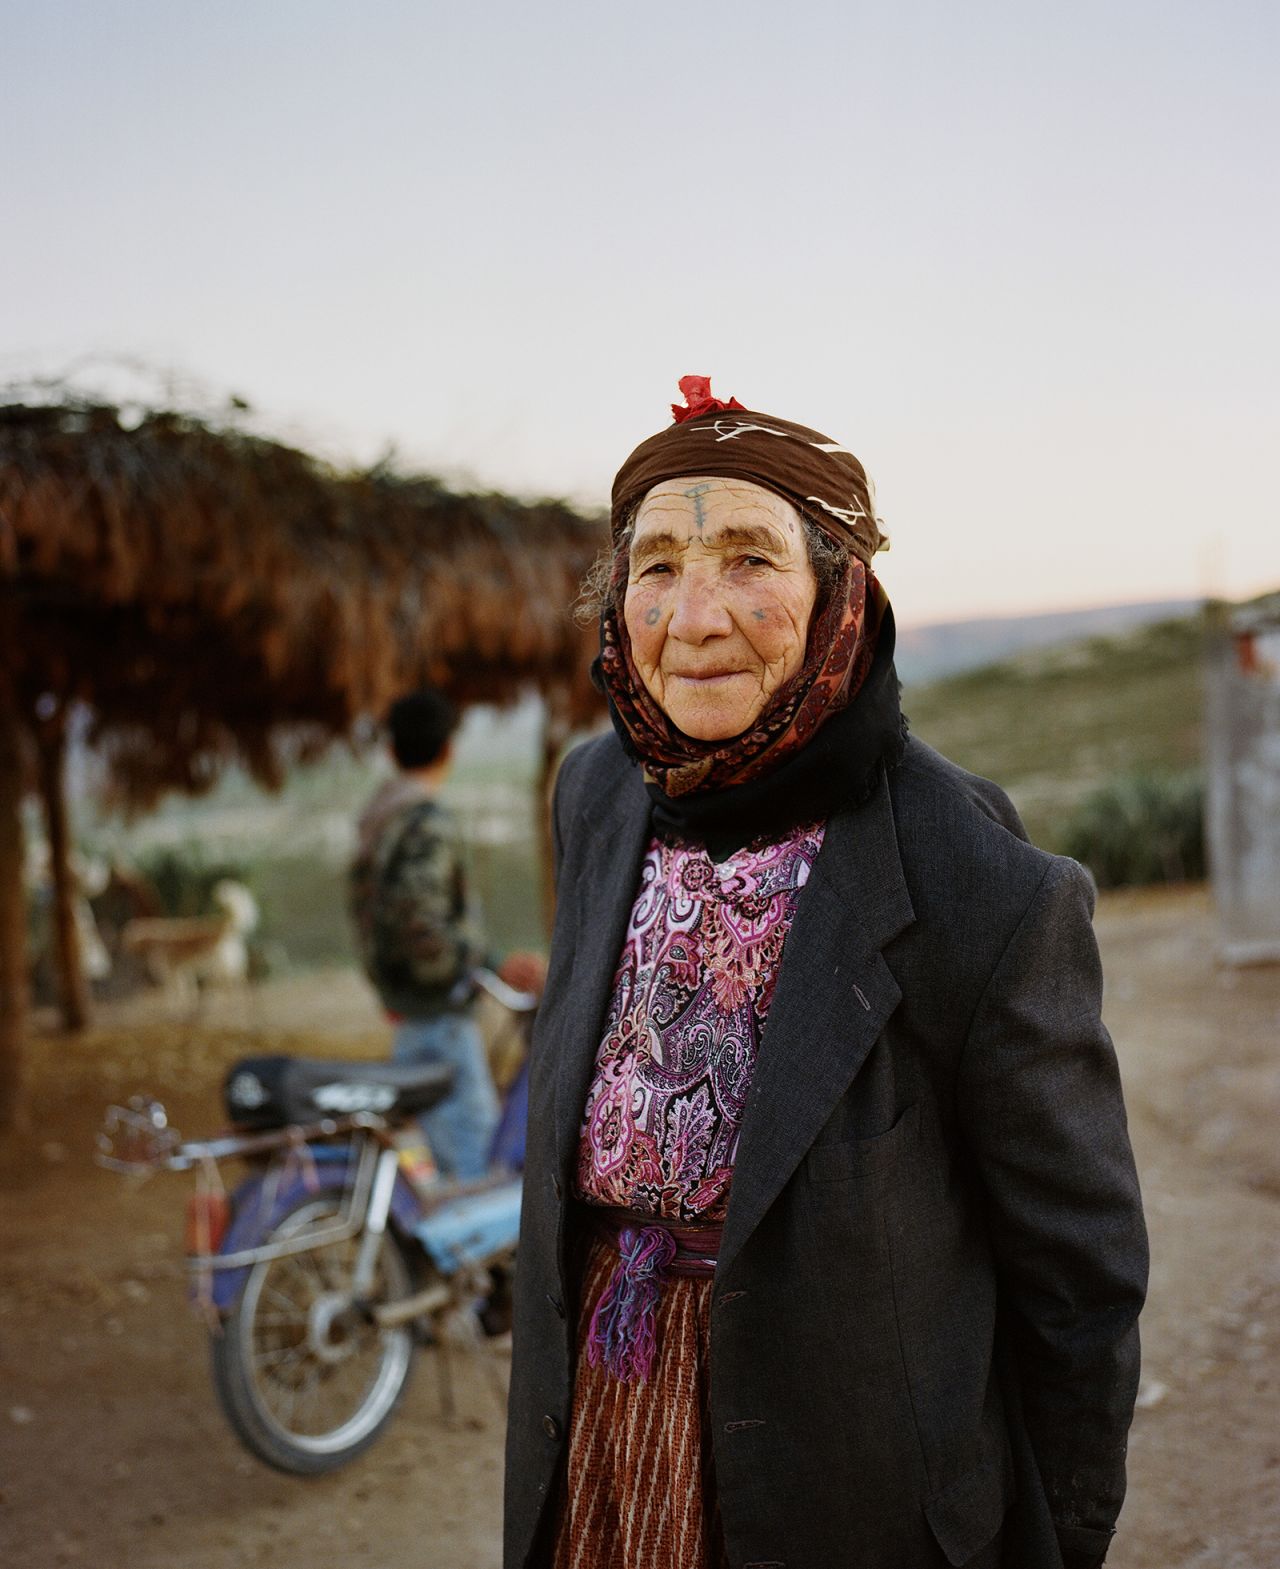 "I have the stars and the moon on my cheeks," Al-Arashi said Brika, from Siliana, Tunisia, told her. "They're the most beautiful things my eyes have seen. I don't know how to read or write and I don't have any devices like you, but I know my land and my earth, the stars and moon help me navigate it. That's why I'm here." 